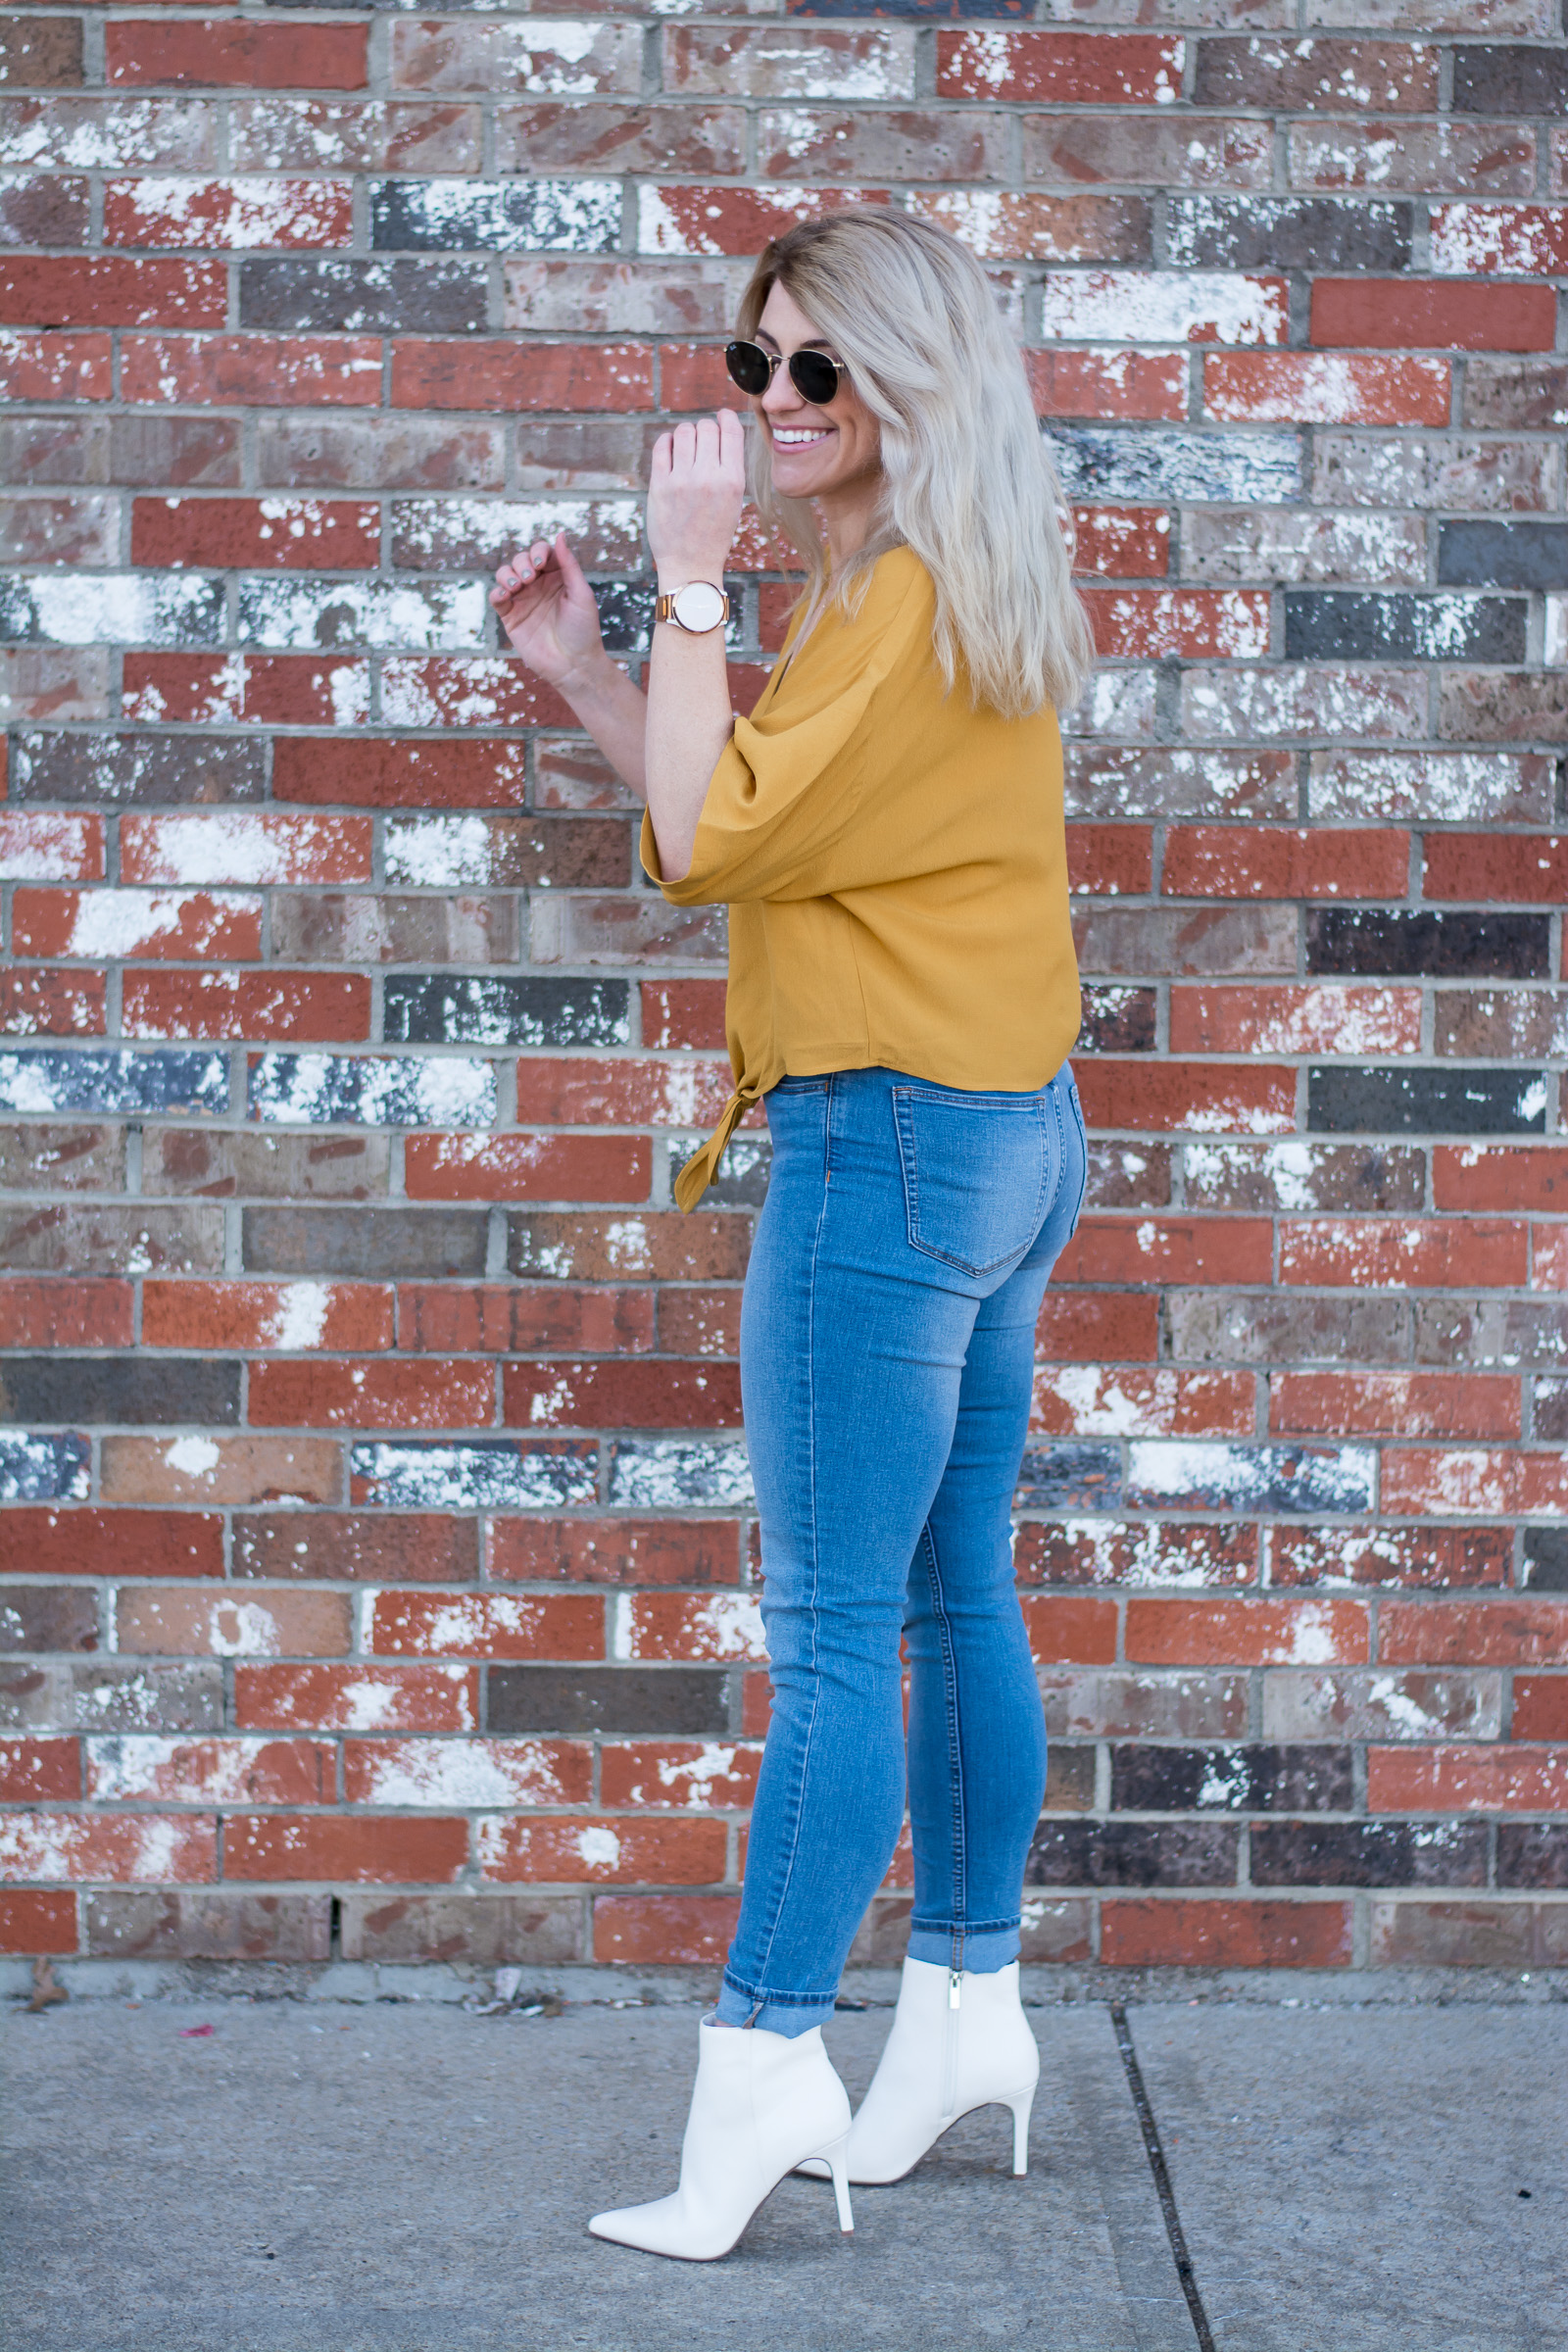 Spring Outfit Idea: Mustard Blouse + White Booties. | Ashley from LSR